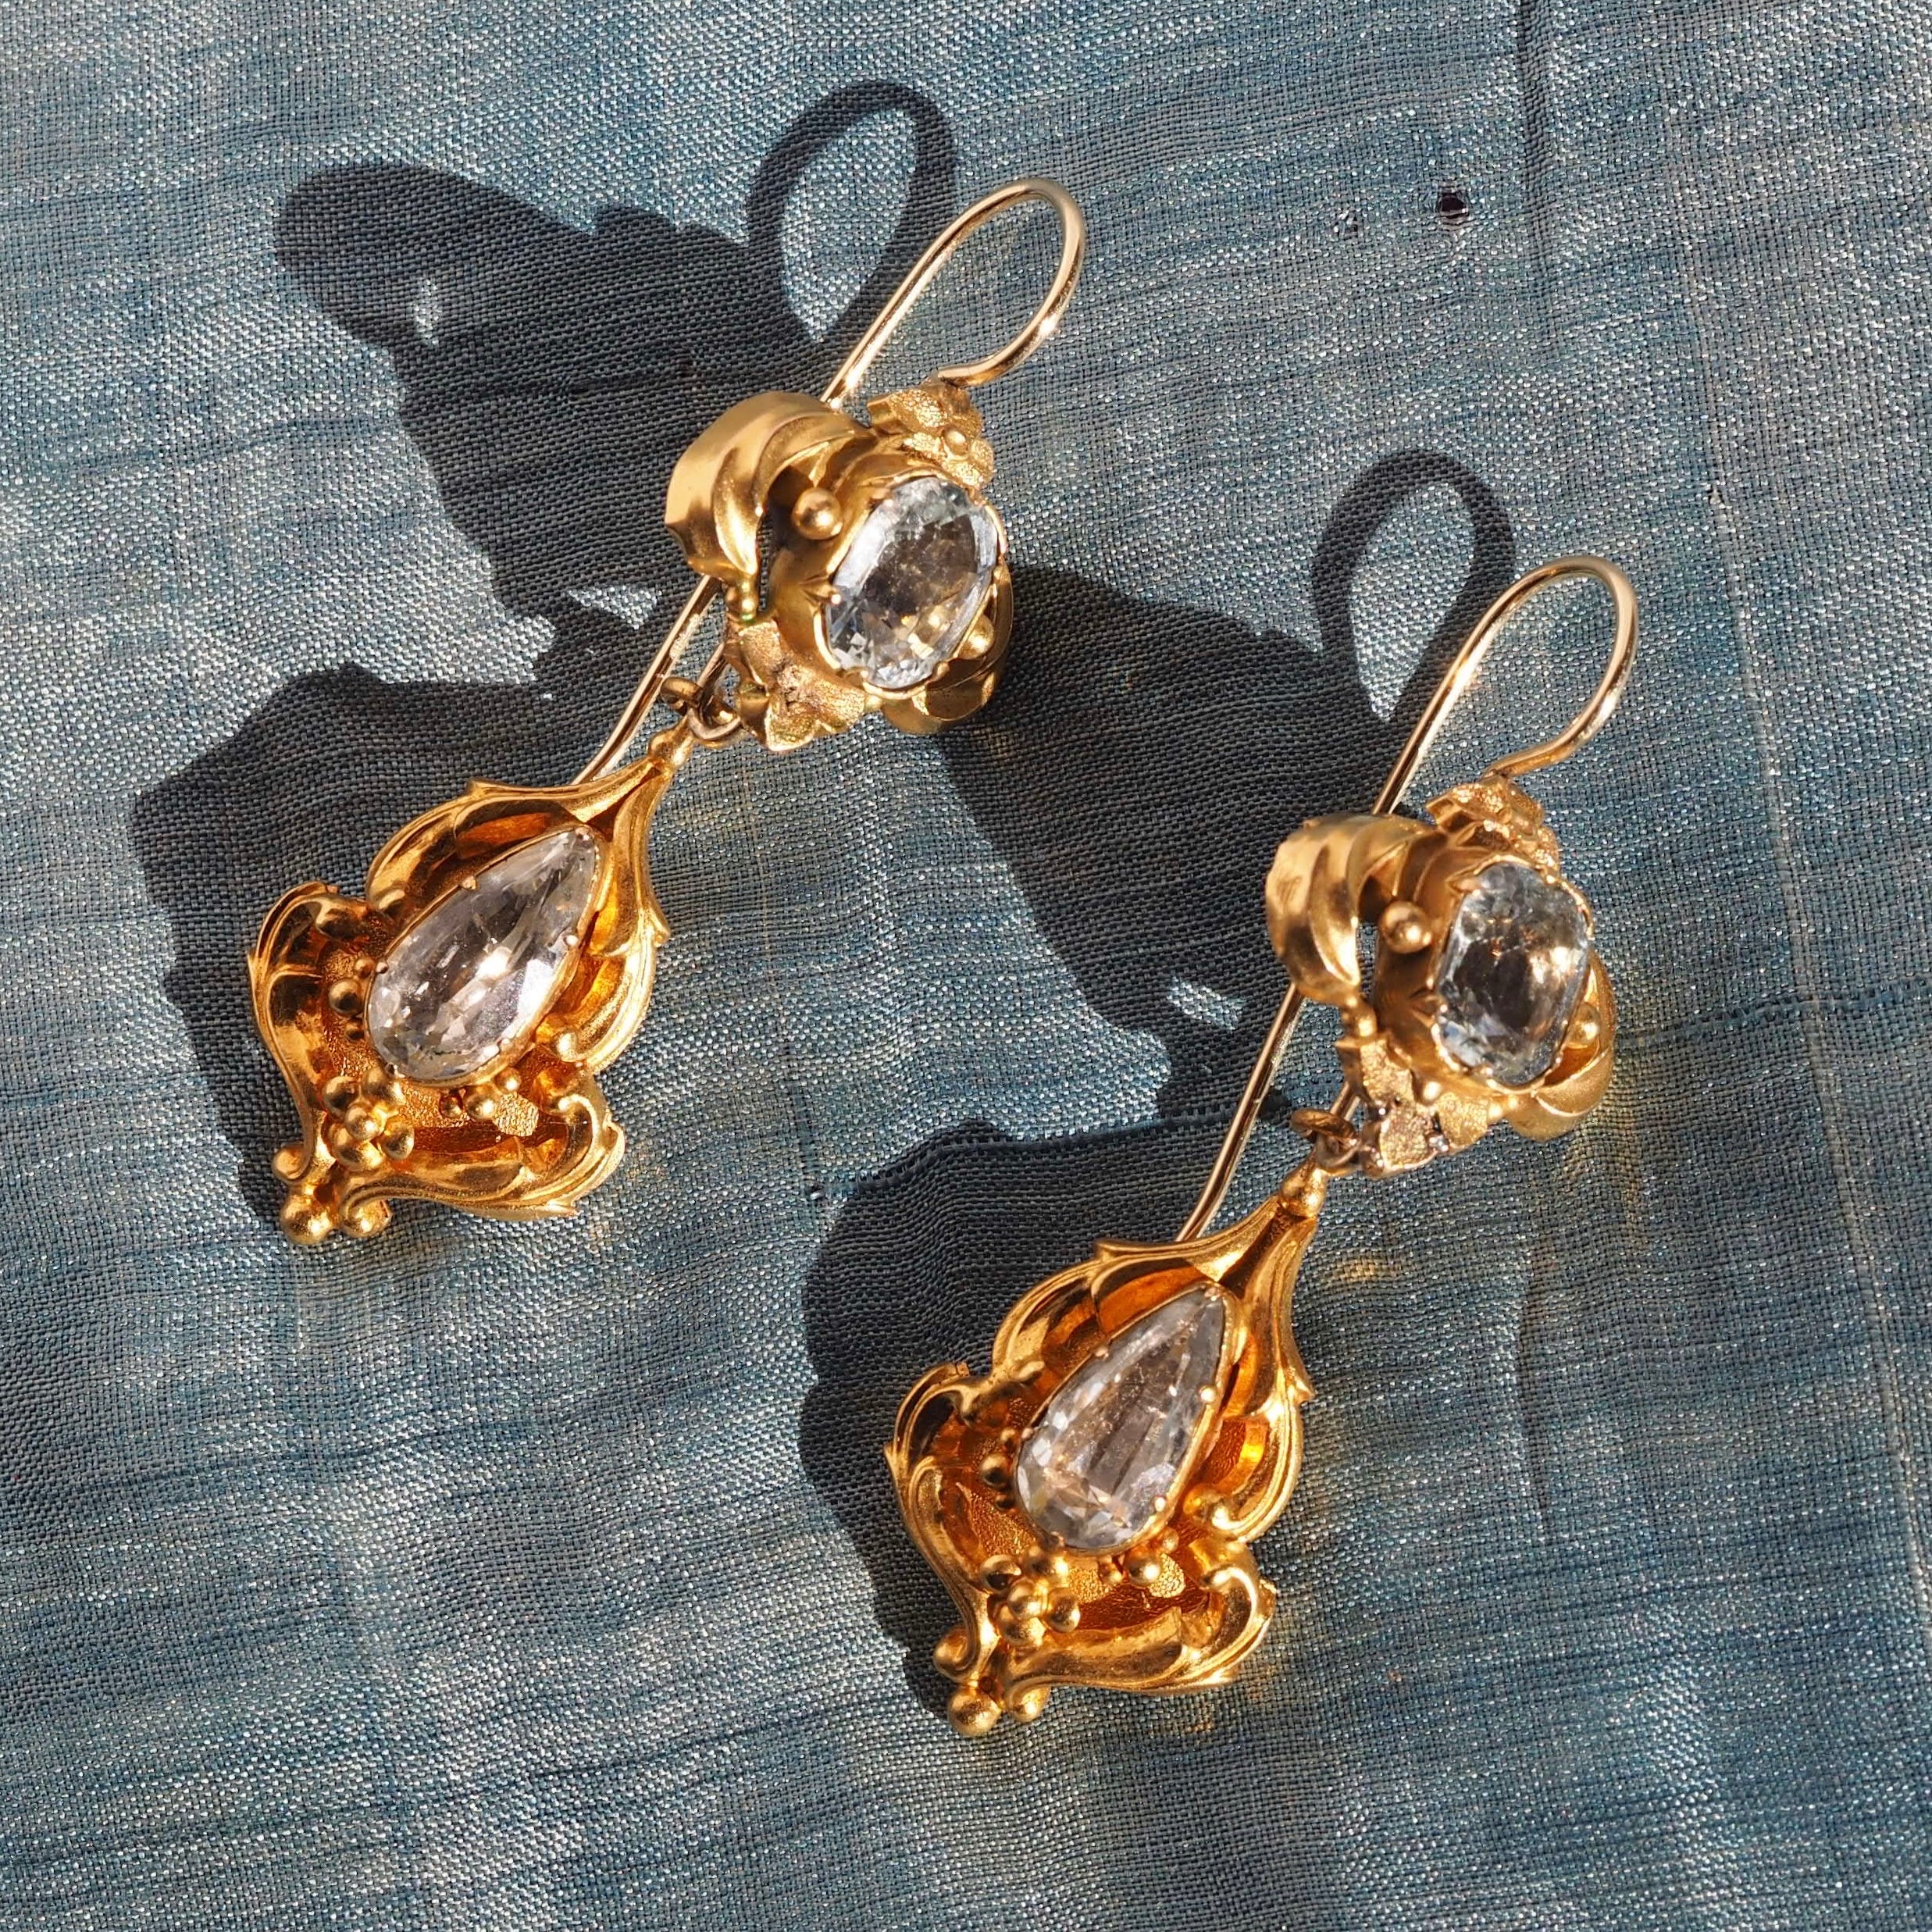 Antique Georgian Regency Style Aquamarine and Topaz Demi-Parure Suite of Gold Earrings and Pendant/Brooch